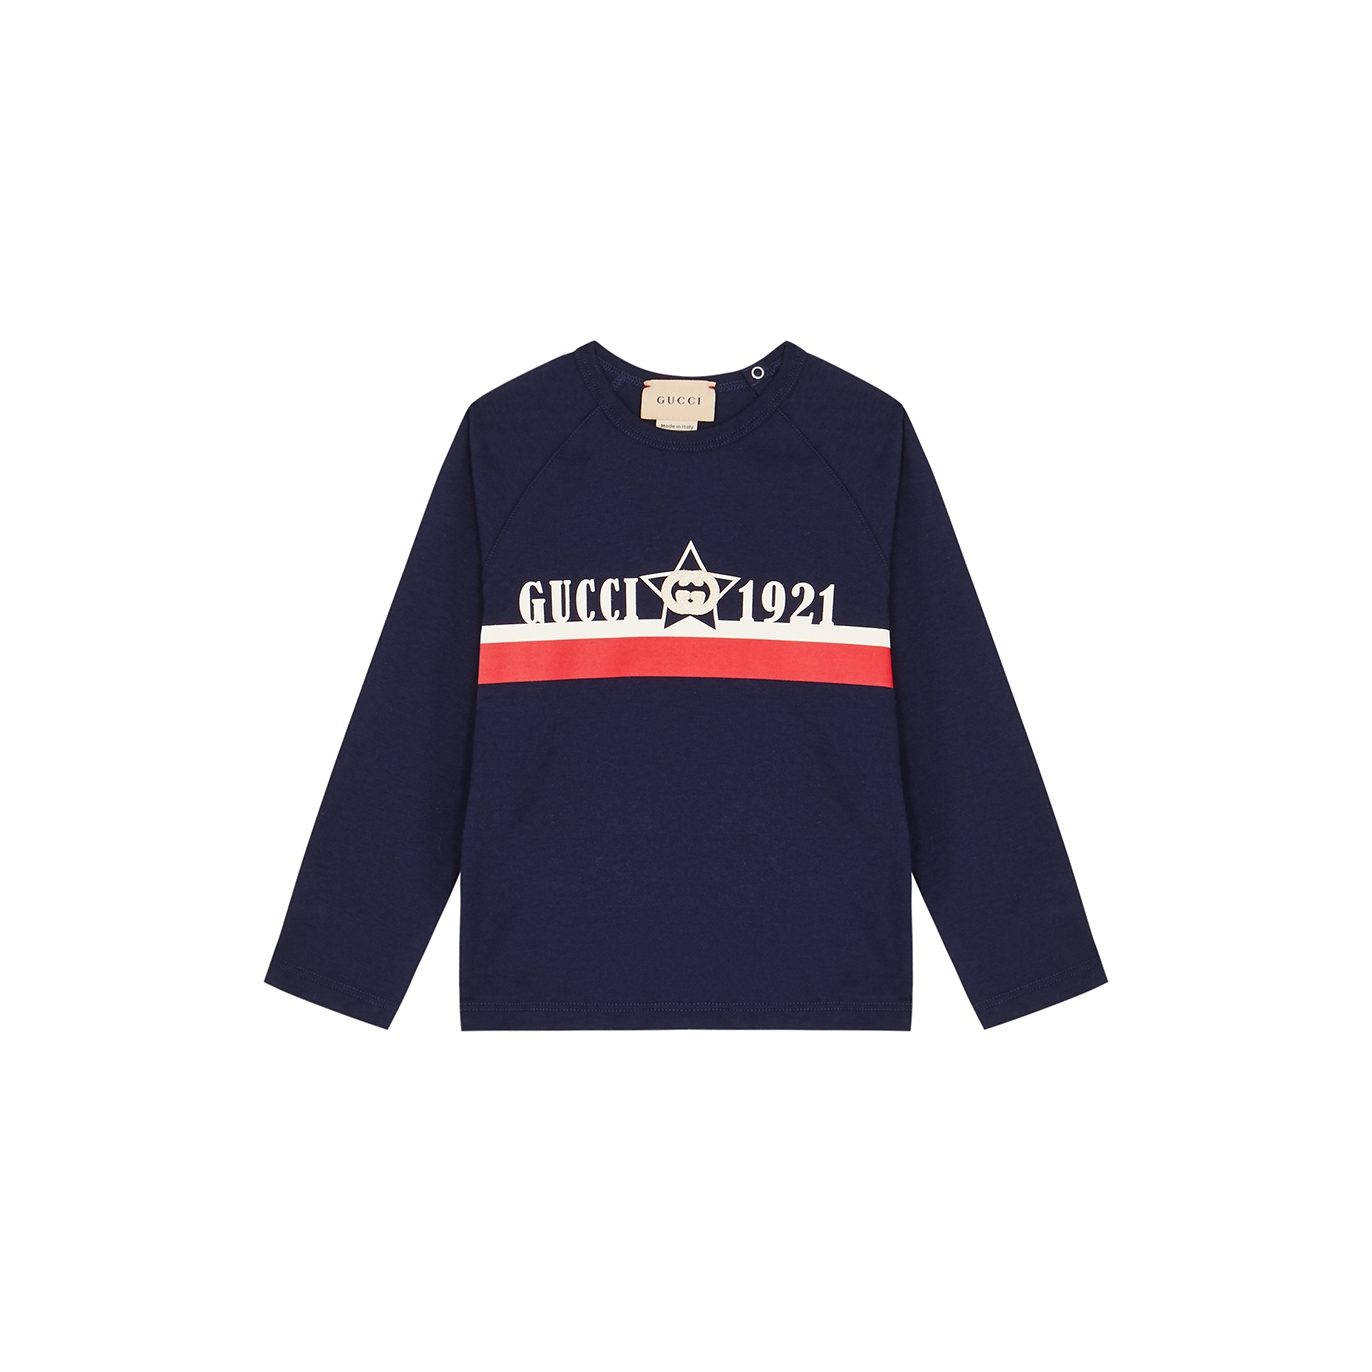 Gucci Kids Navy Printed Cotton Top - Blue - 9 Months